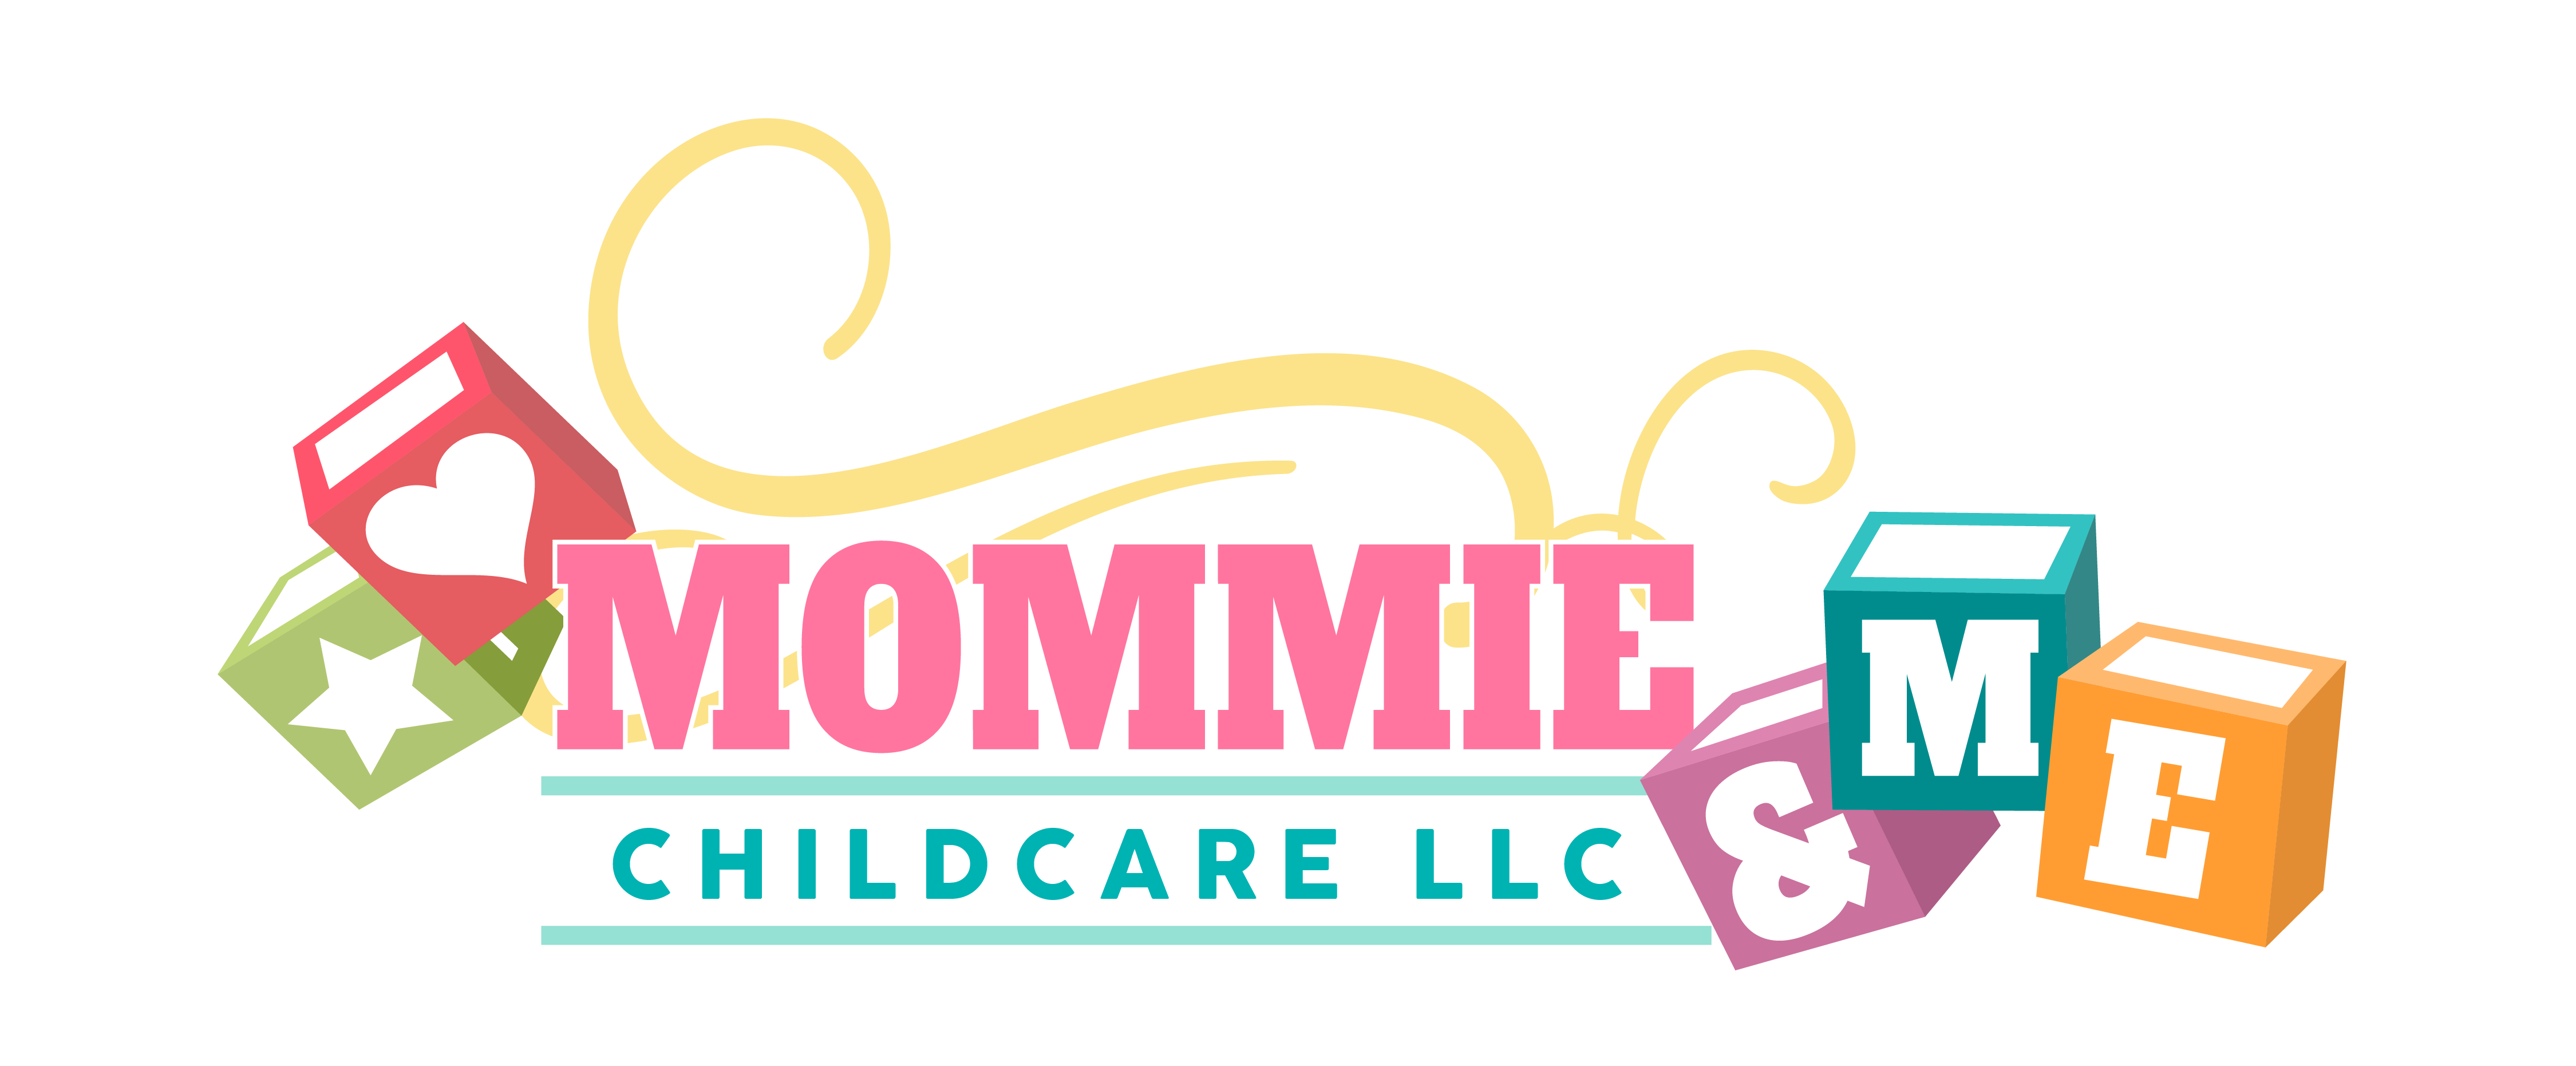 Mommie & me logo-05 outlined